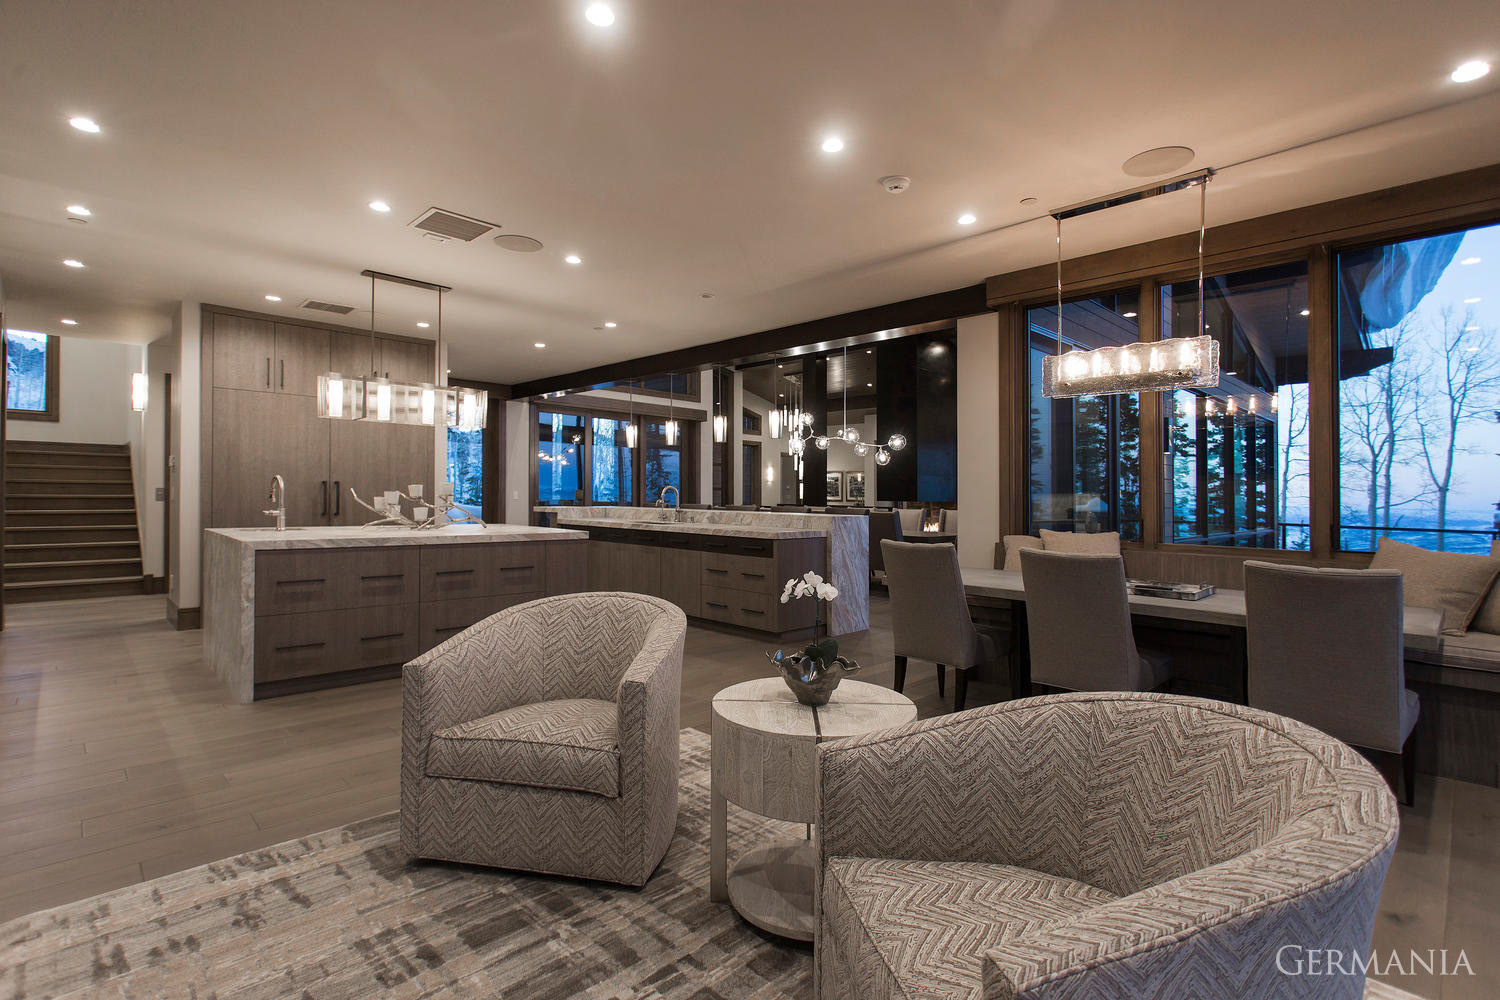 Germania can design the most memorable custom luxury home dining room. Luxurius cabinets and incredible light fixtures bring mountain living to life.